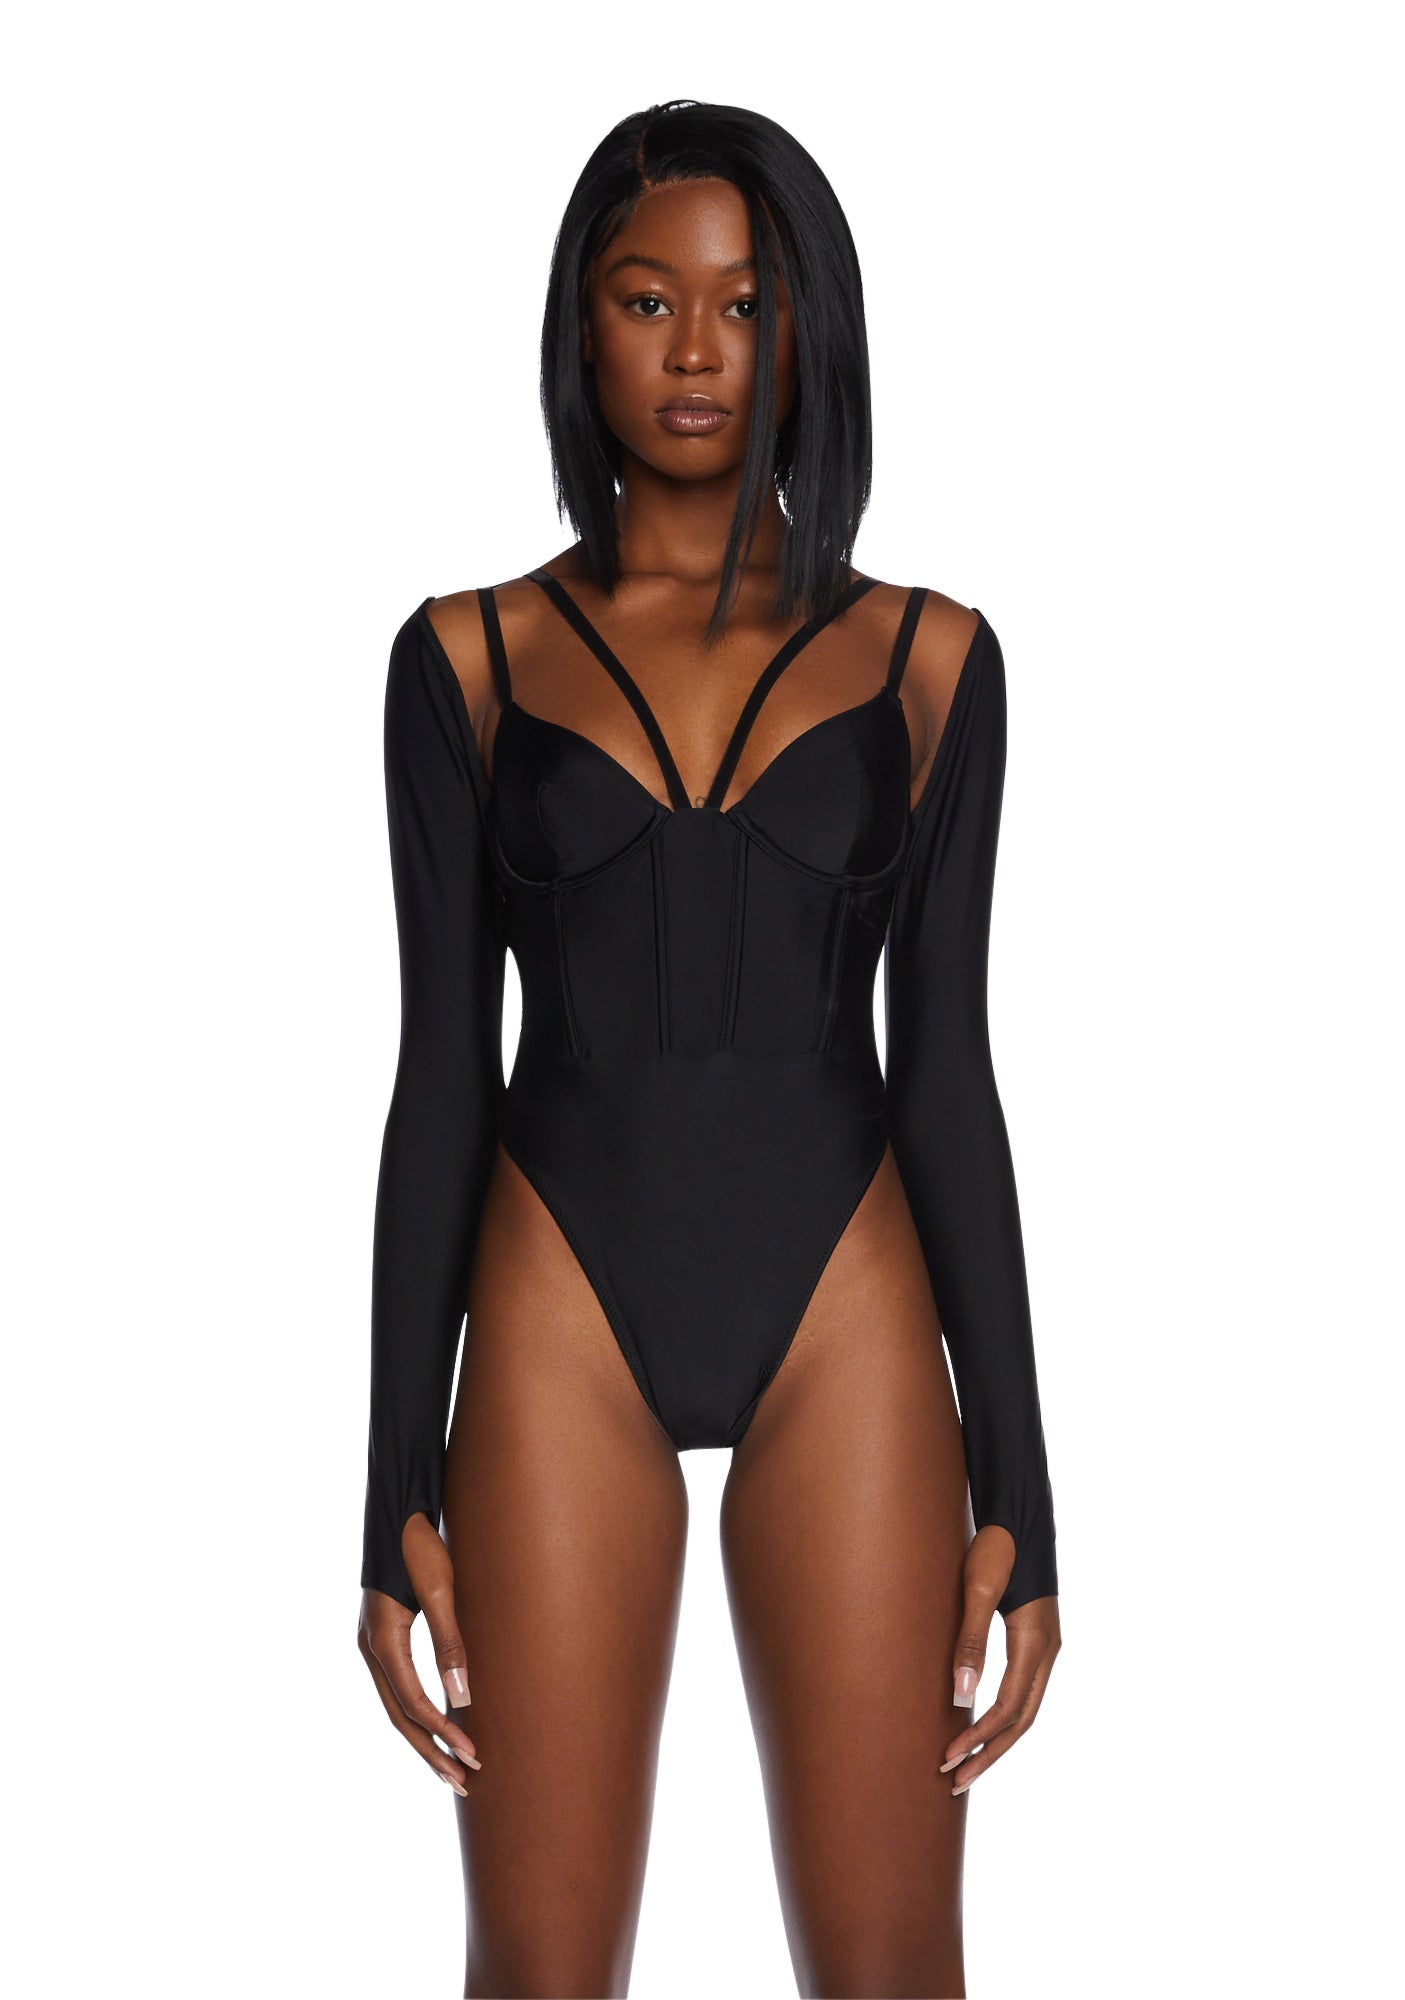 OMG OMG!! I am in love! You need this bodysuit in your closet!!😭😍😍